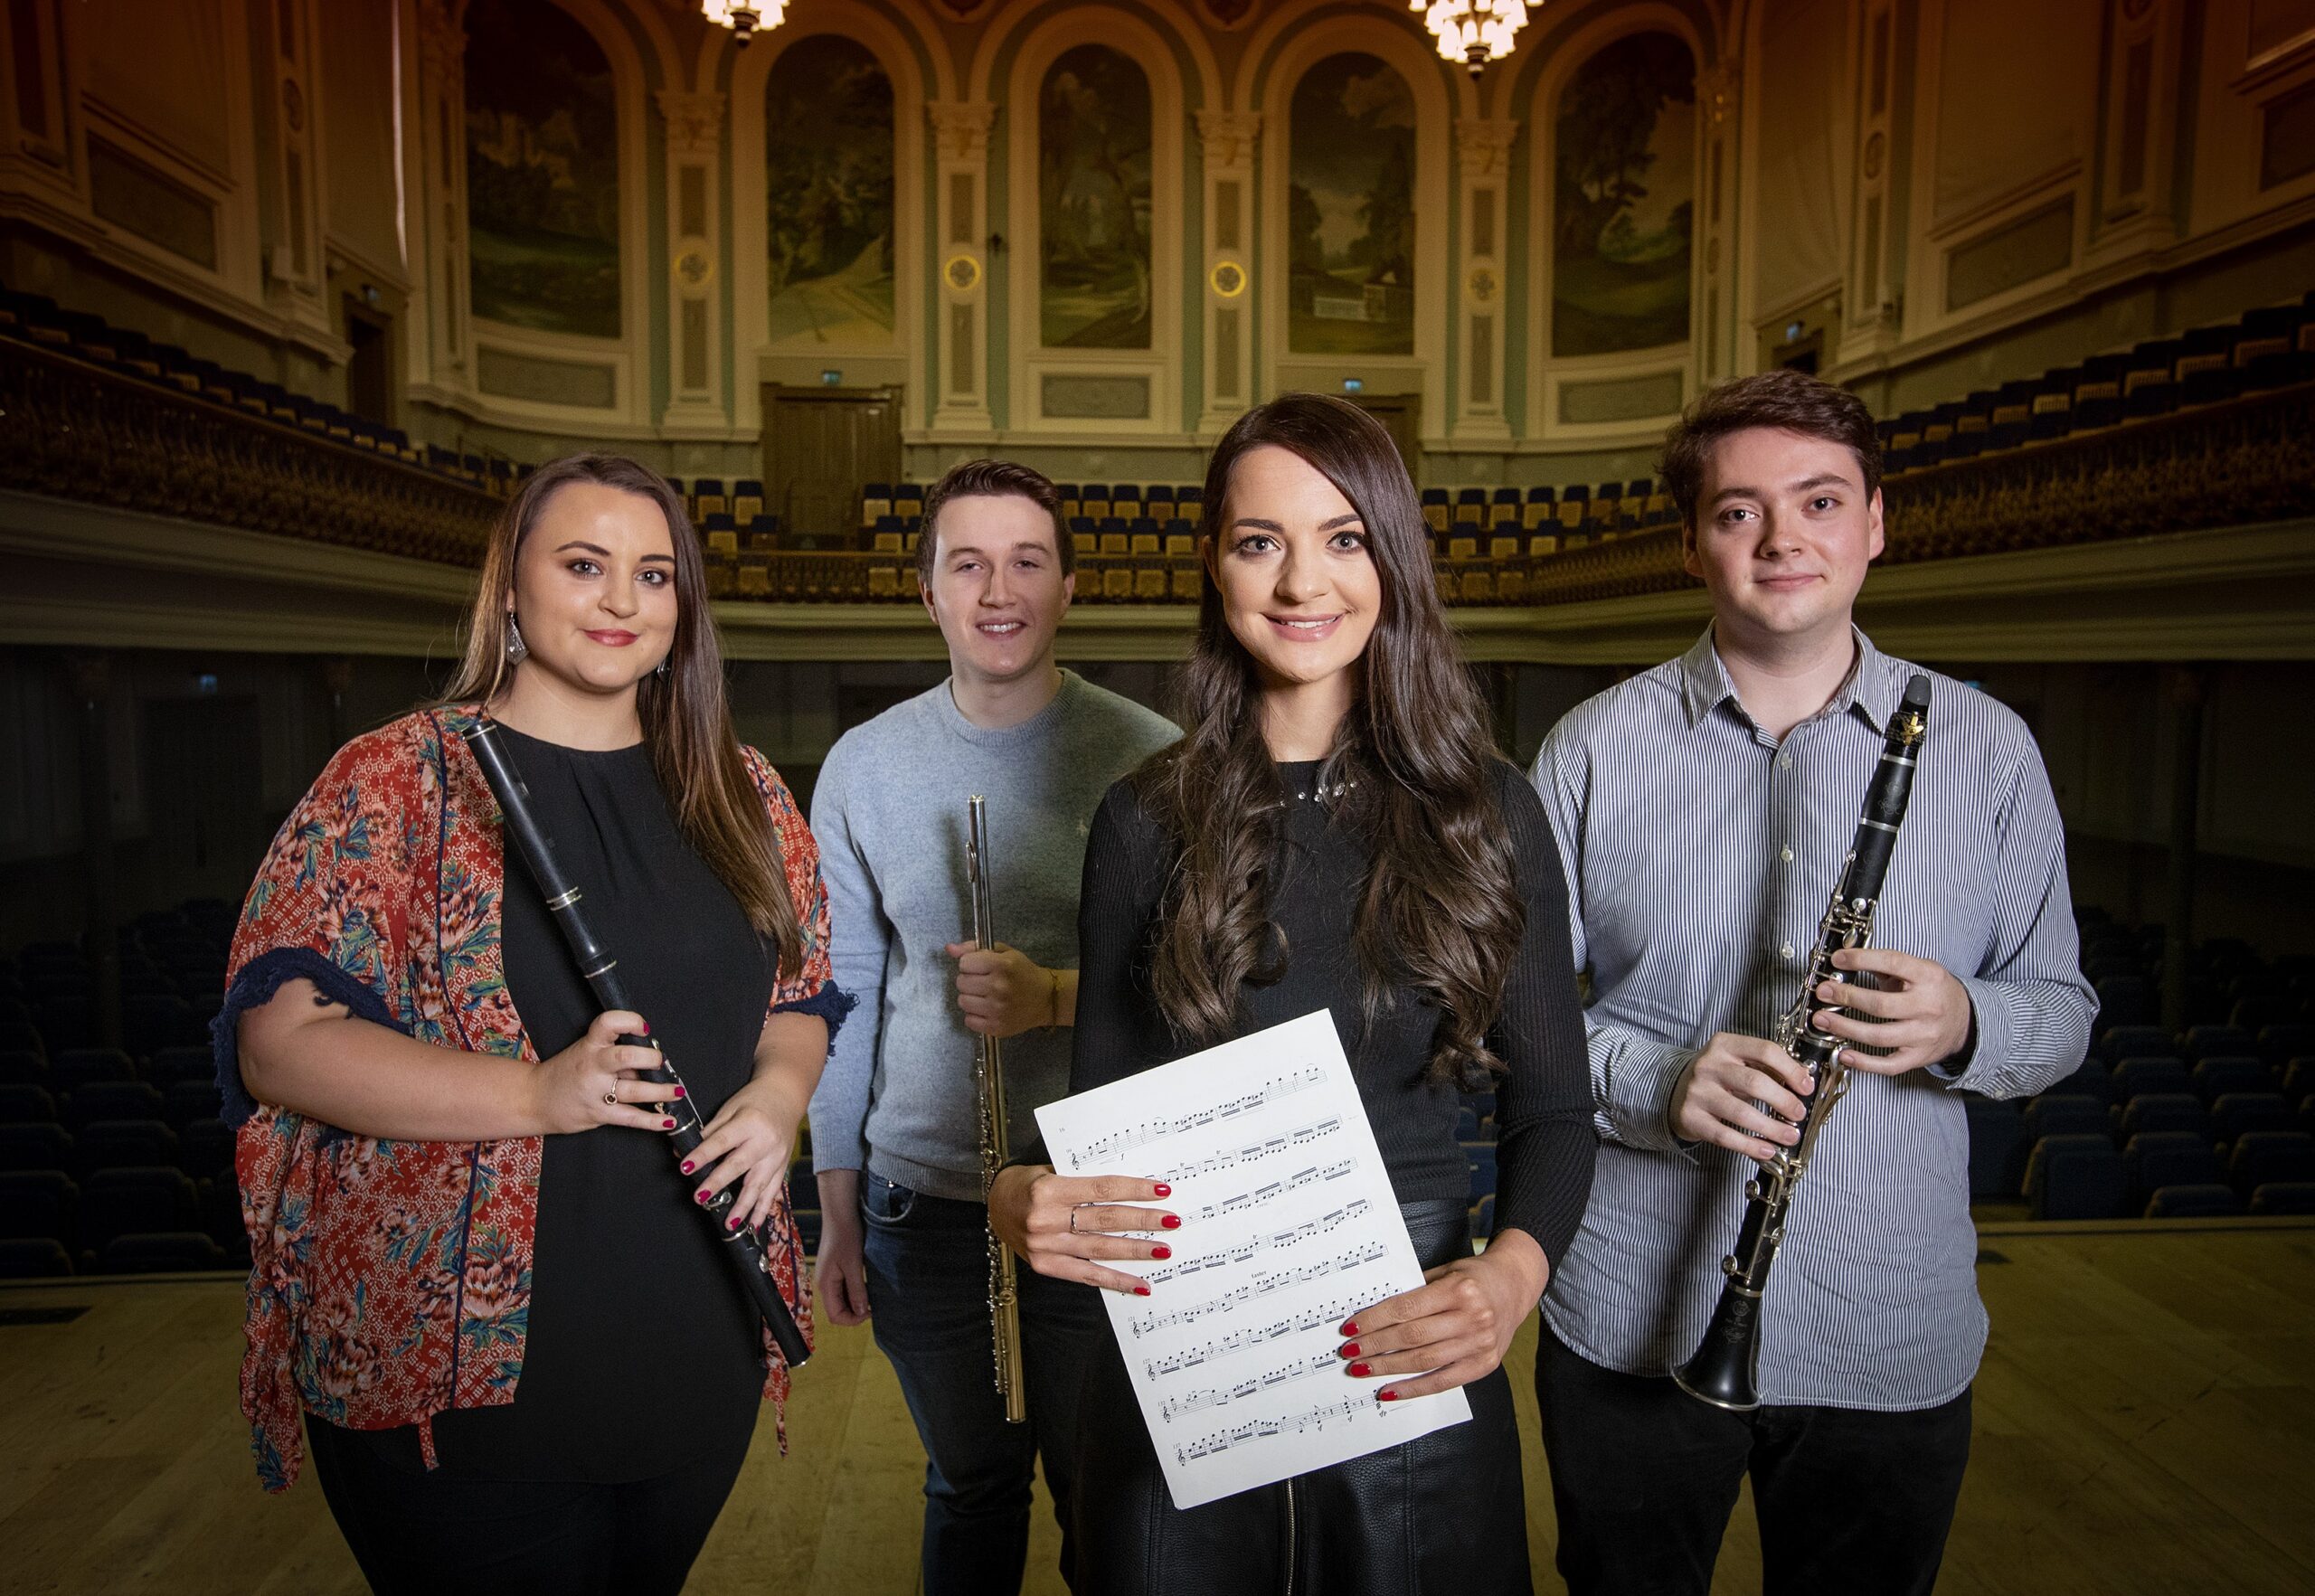 Gifted musicians and songwriters in Newry invited to apply to BBC NI and Arts Council’s Young Musicians’ Platform Award - Newry news